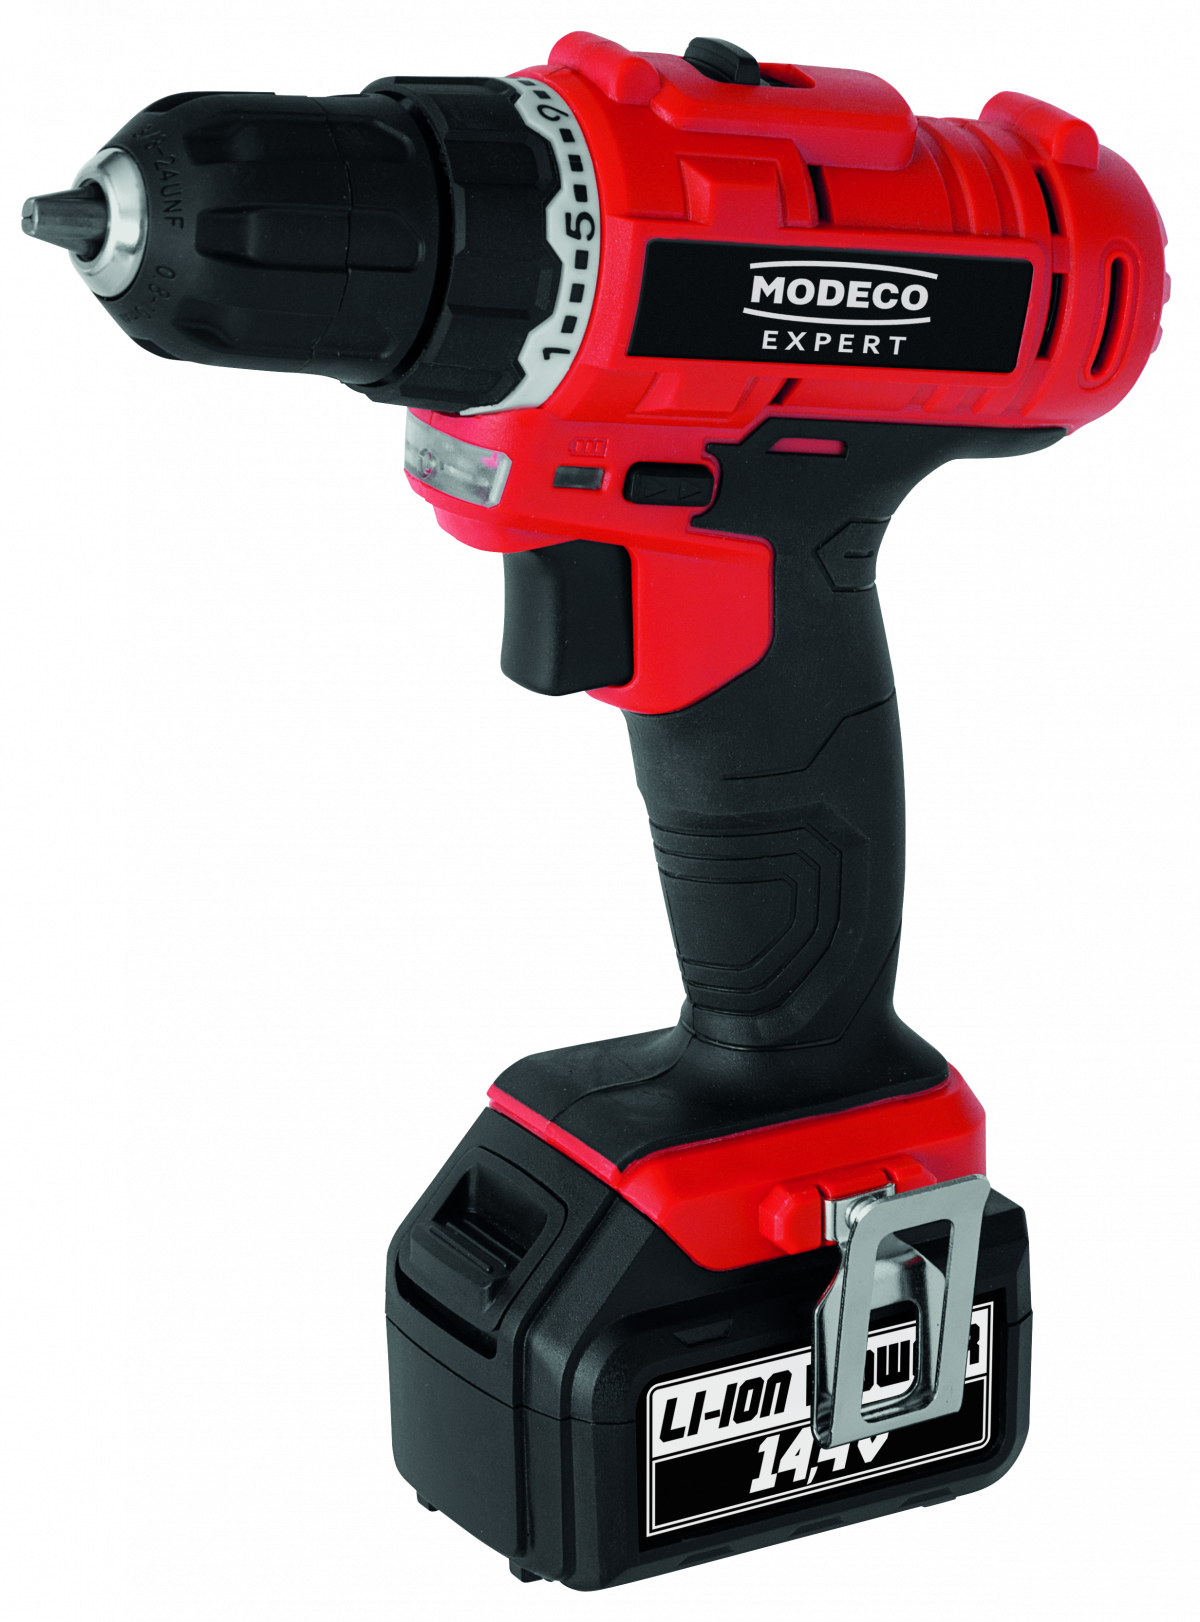 MN-91-121 Cordless drill-driver with battery 14.4 V li-ion